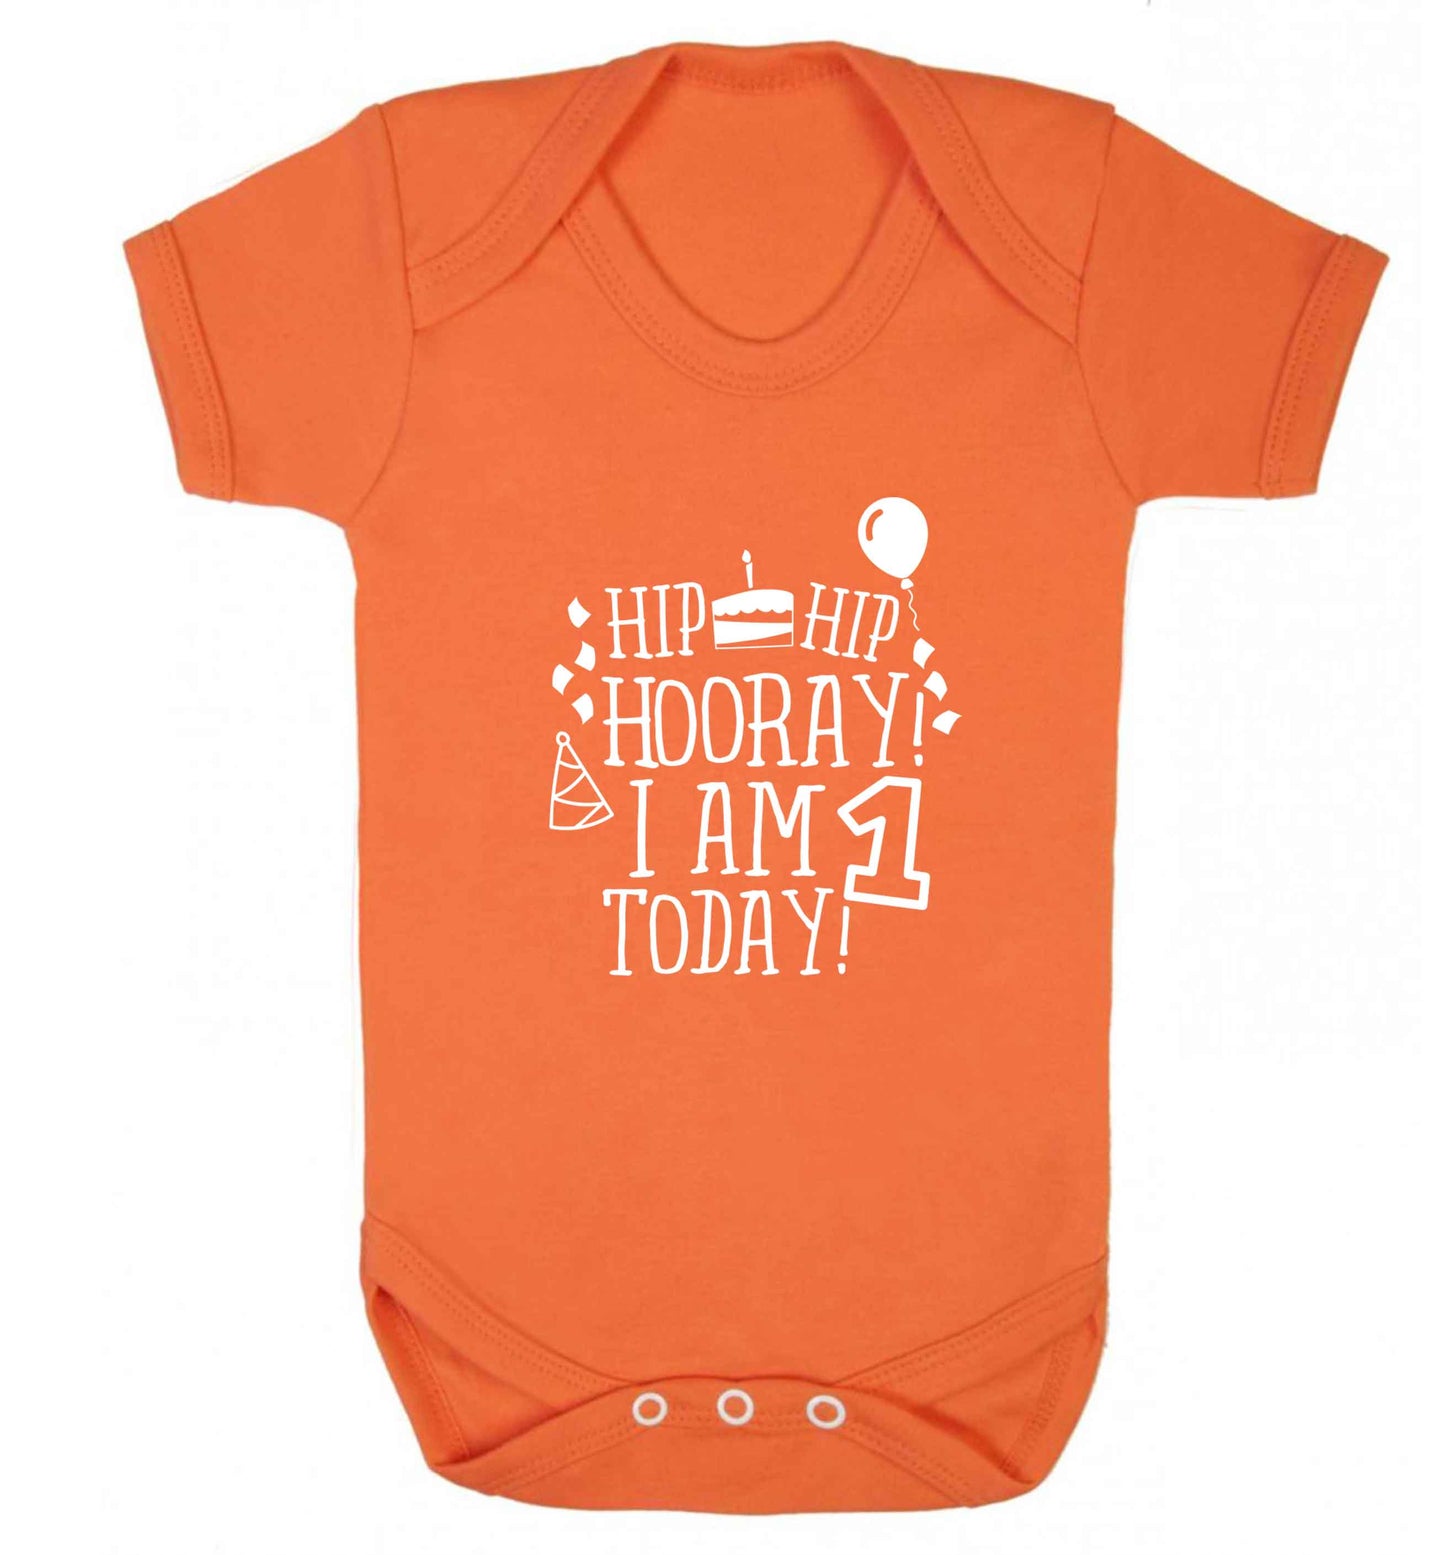 You're 2 Today baby vest orange 18-24 months